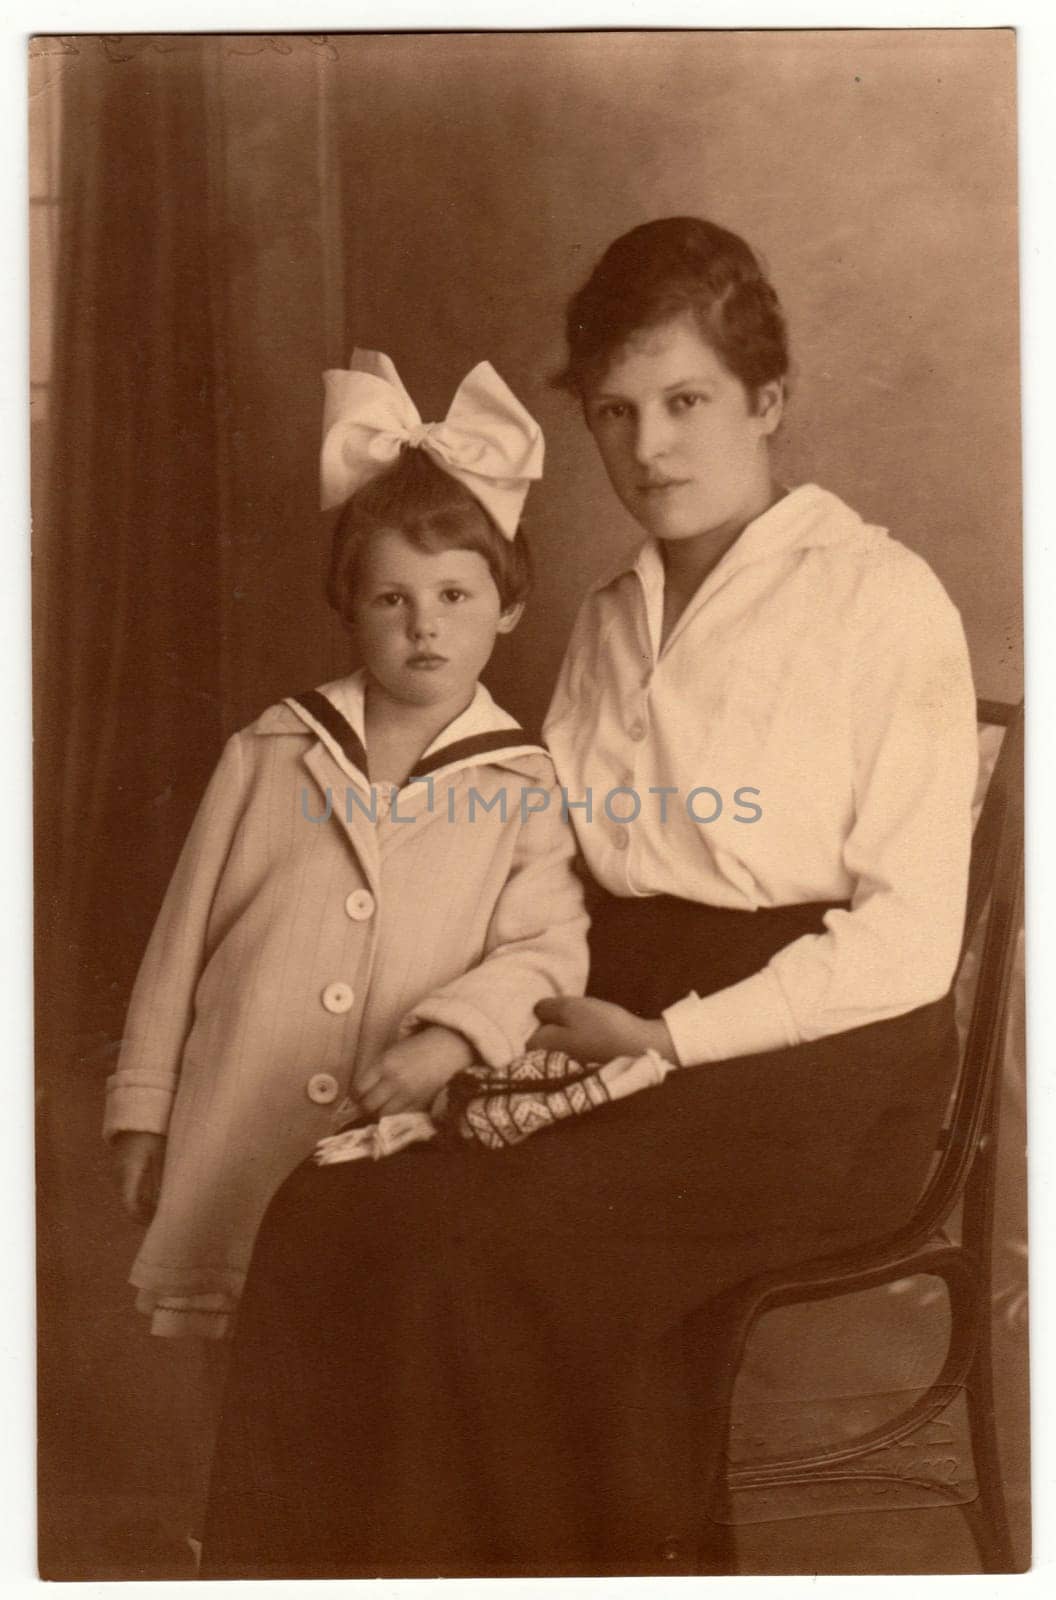 Vintage photo shows woman with her small daughter. Retro black and white studio phortography. Circa 1920s. by roman_nerud